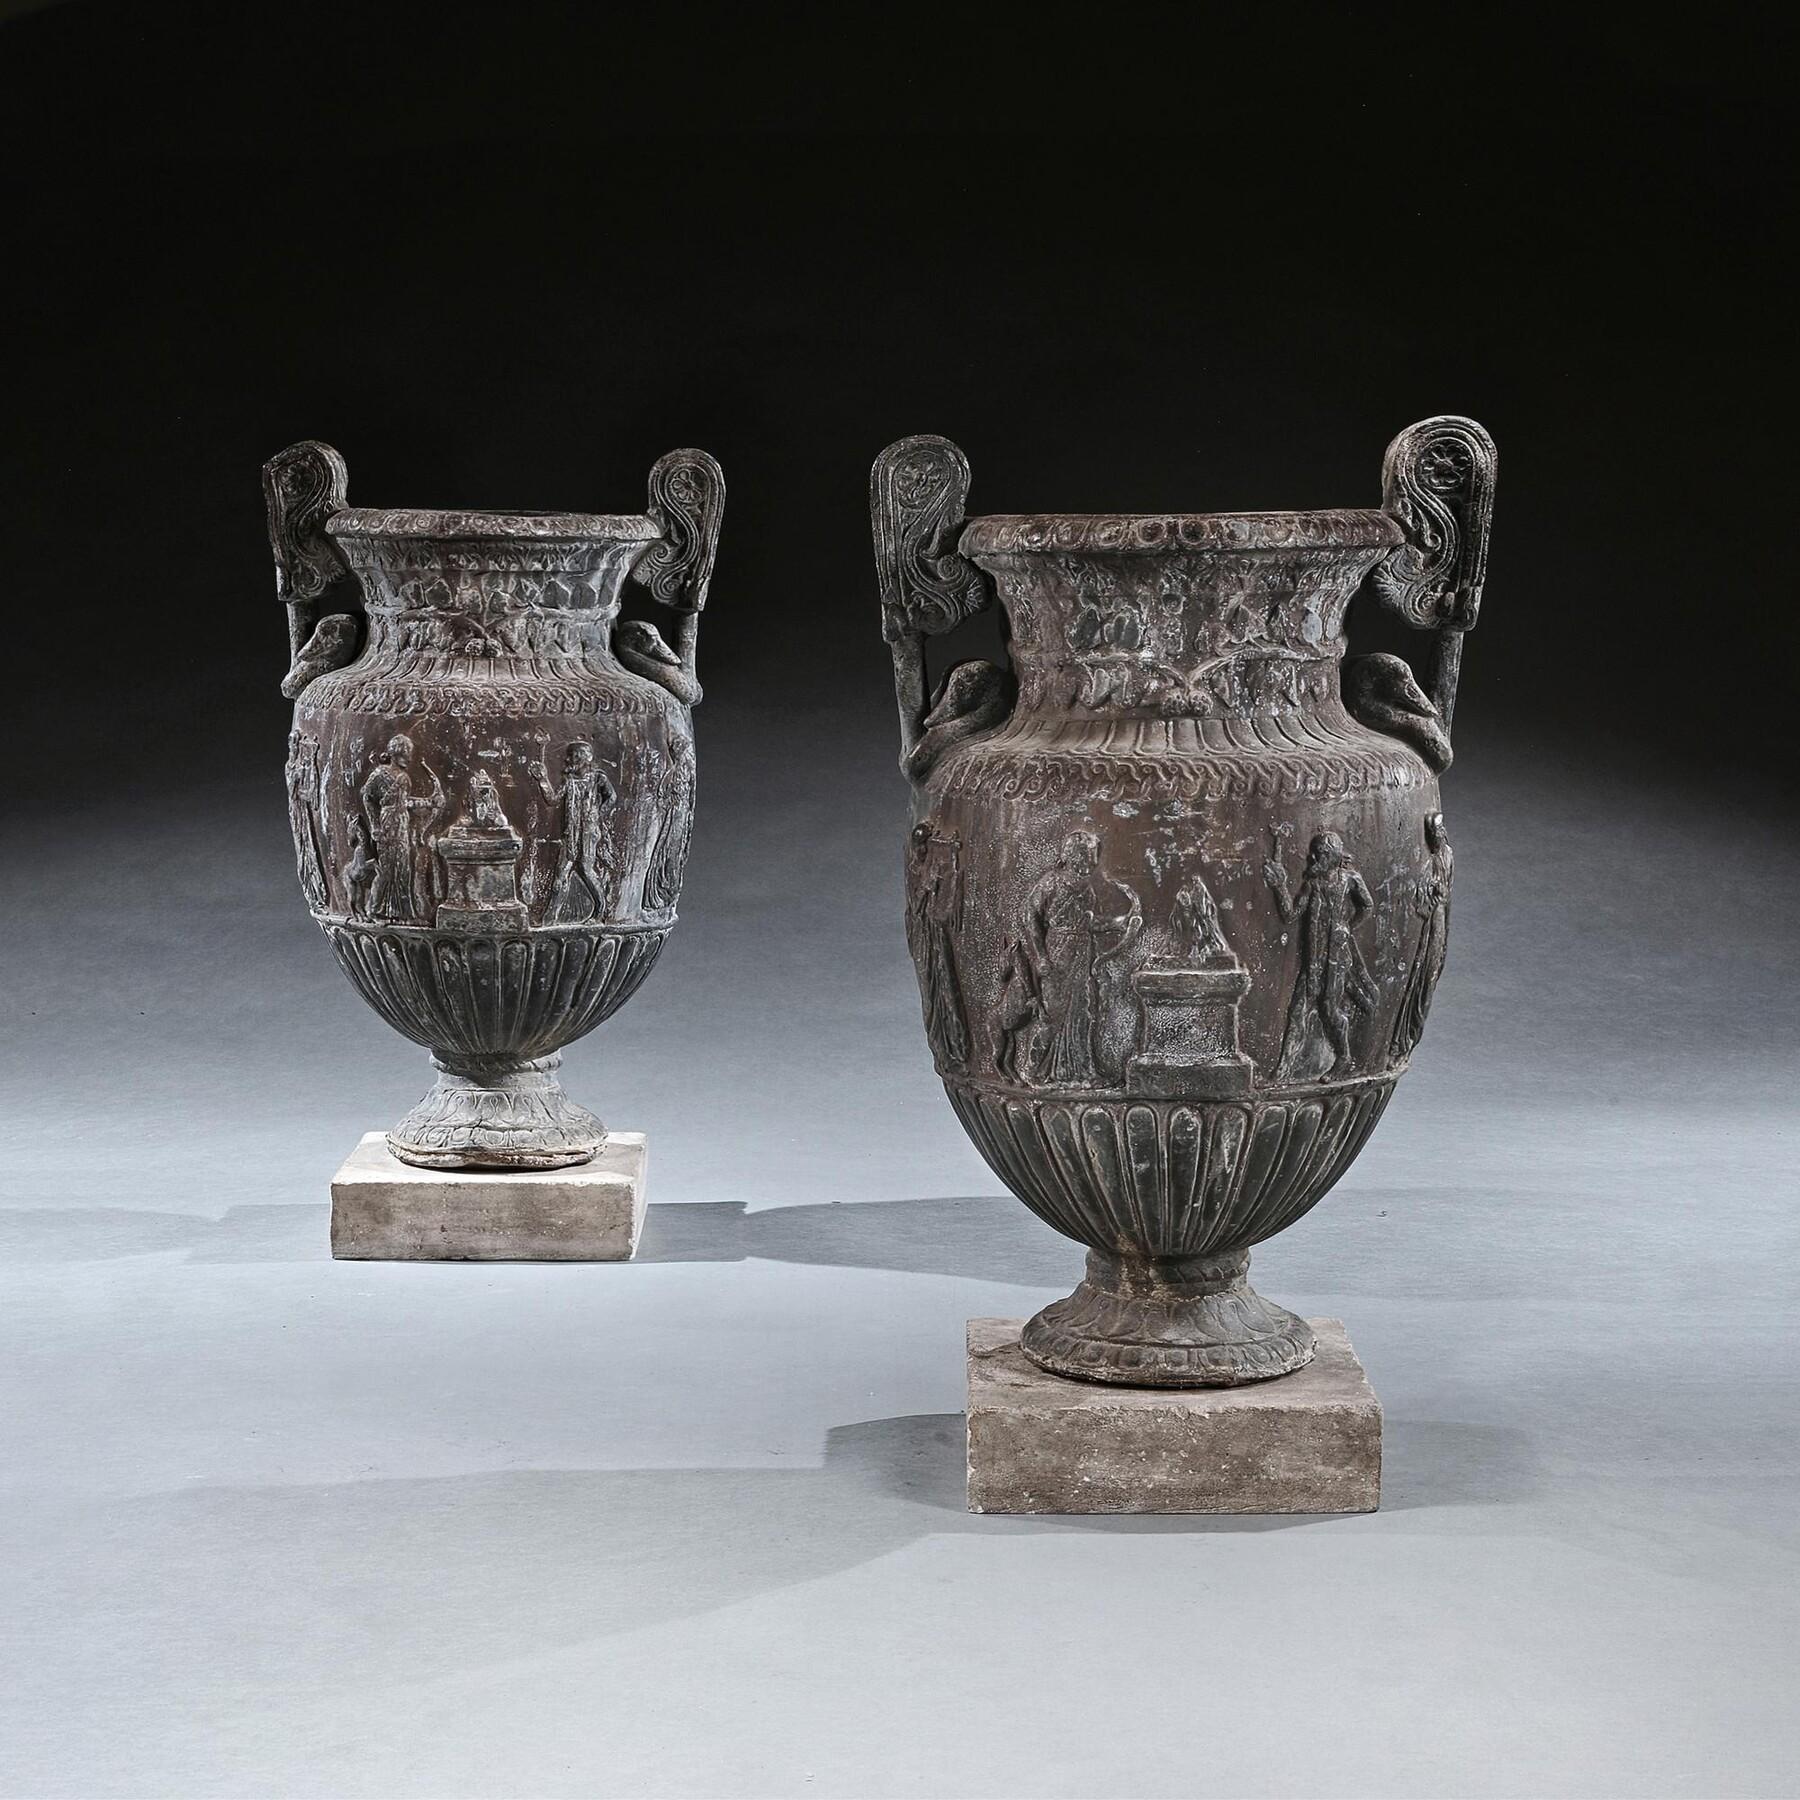 Imposing Pair of French Ornamental Lead Vases Based on the Sosibios Vase Early 2 3